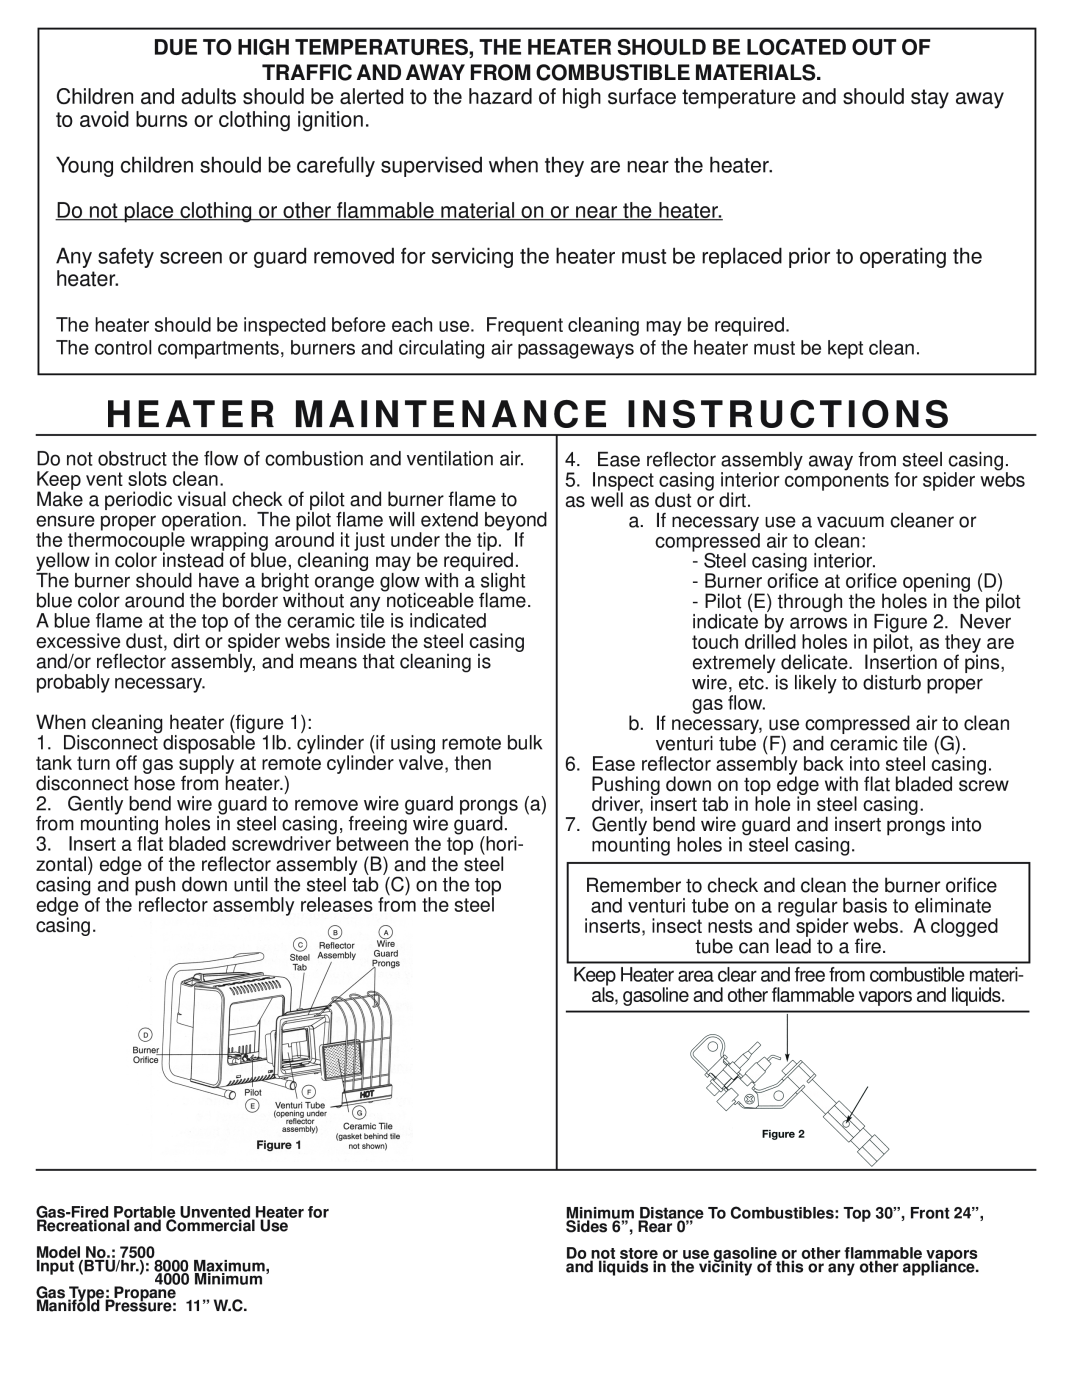 Gas-Fired Products 7500 owner manual Heater Maintenance Instructions, Traffic And Away From Combustible Materials 